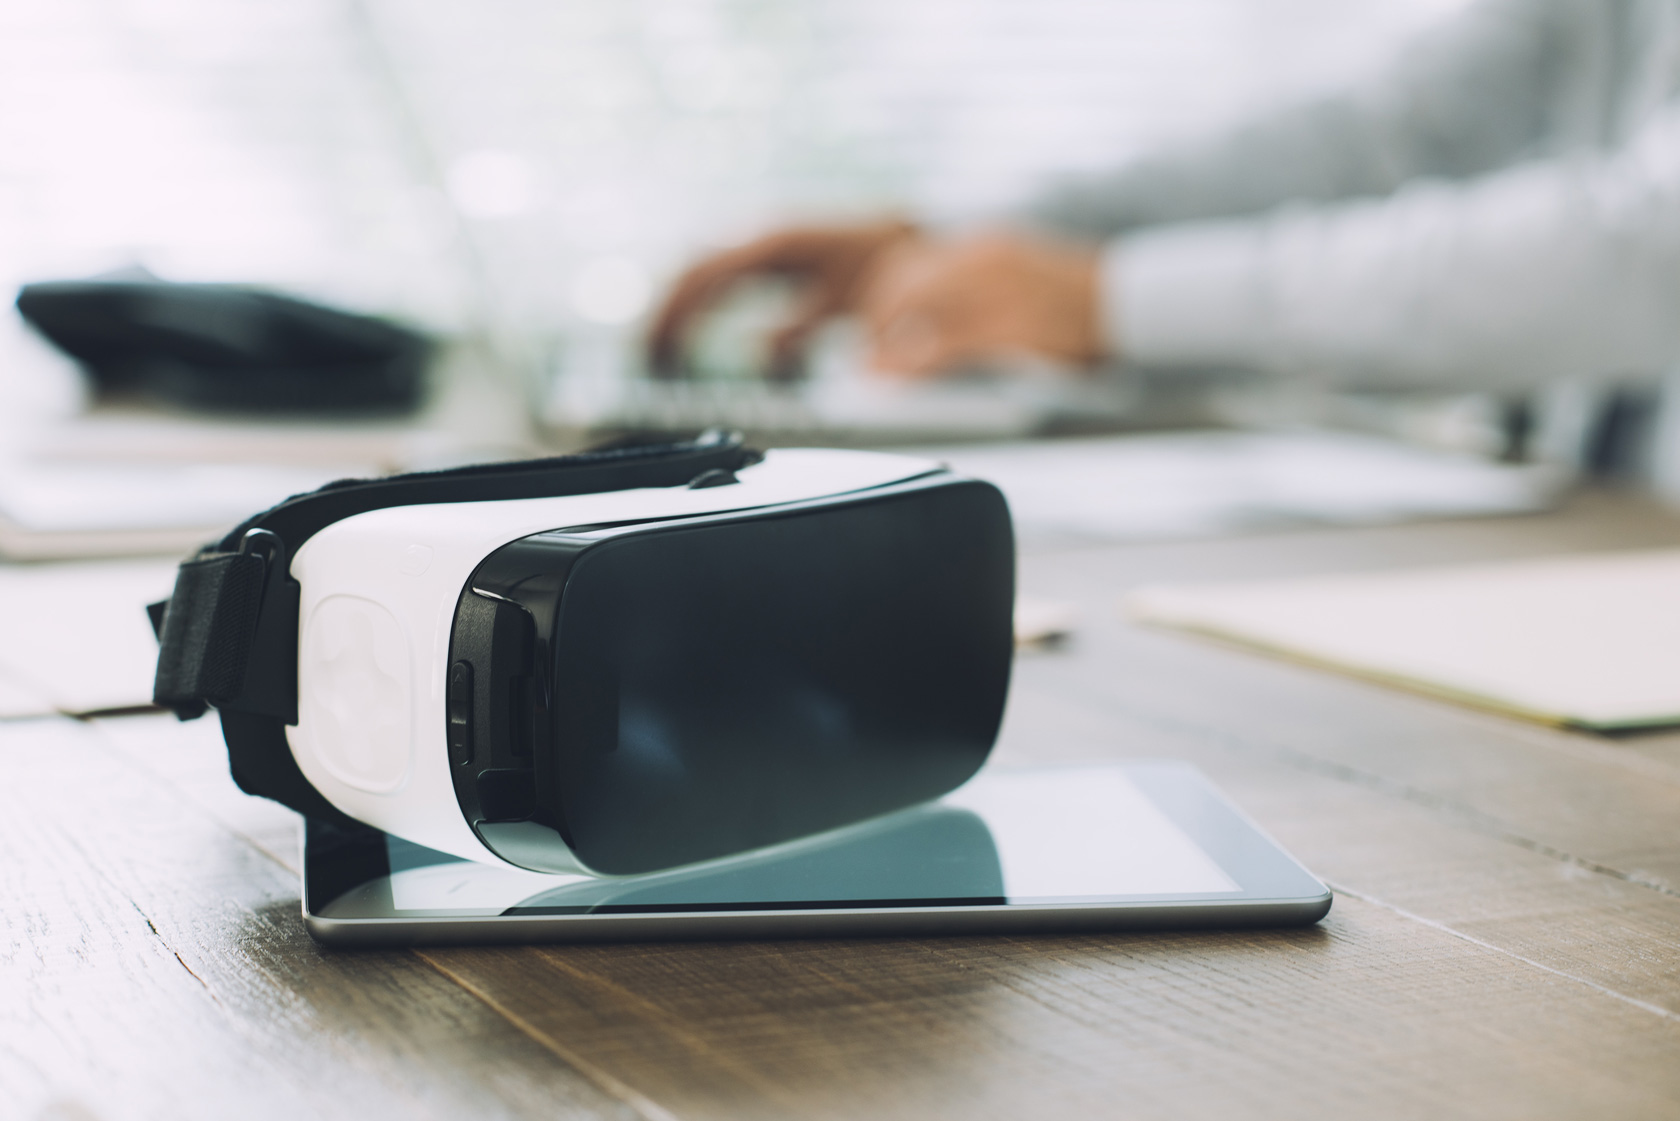 Virtual Reality Could Become a Real World Benefit to Dentists and Their Patients